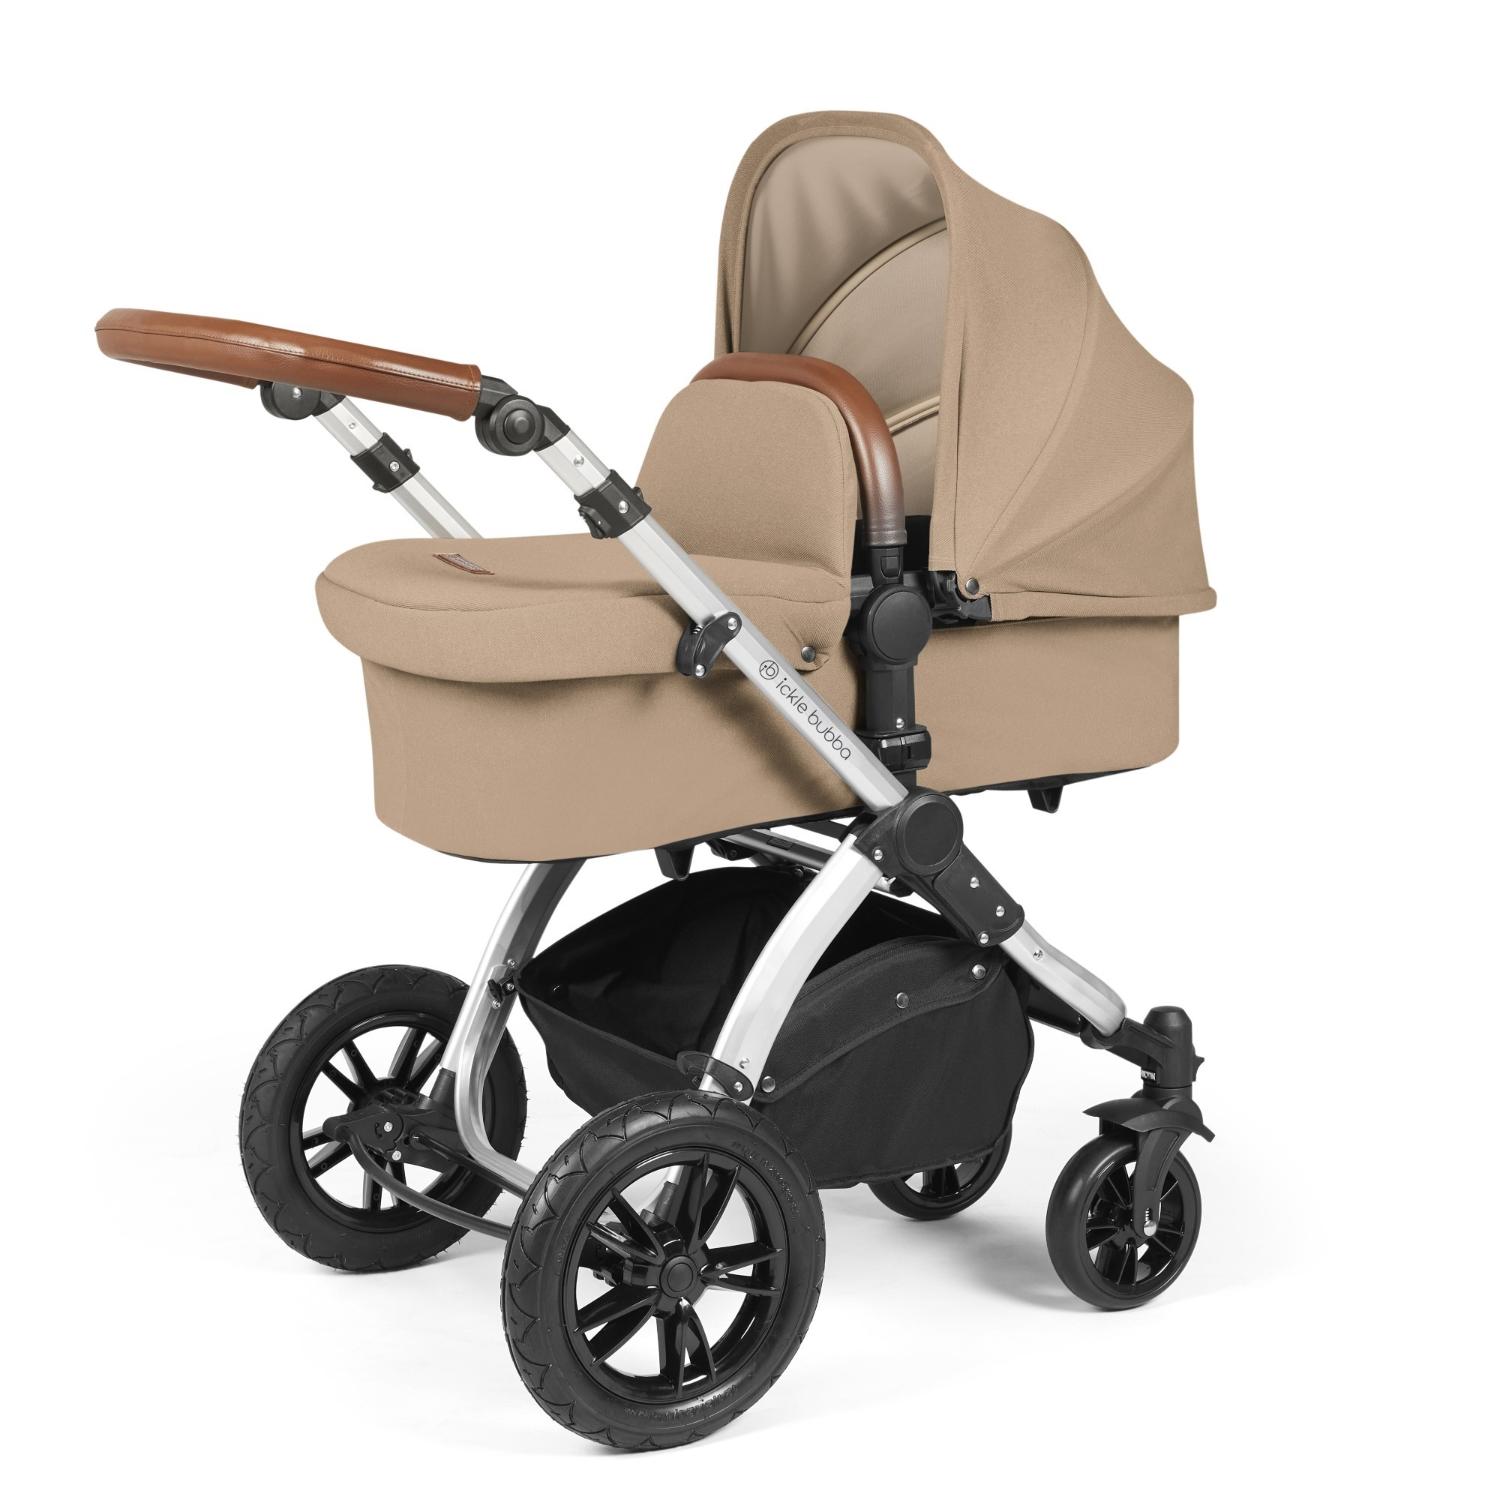 Ickle Bubba Stomp Luxe Pushchair with carrycot attached in Desert beige colour with silver chassis and tan handle